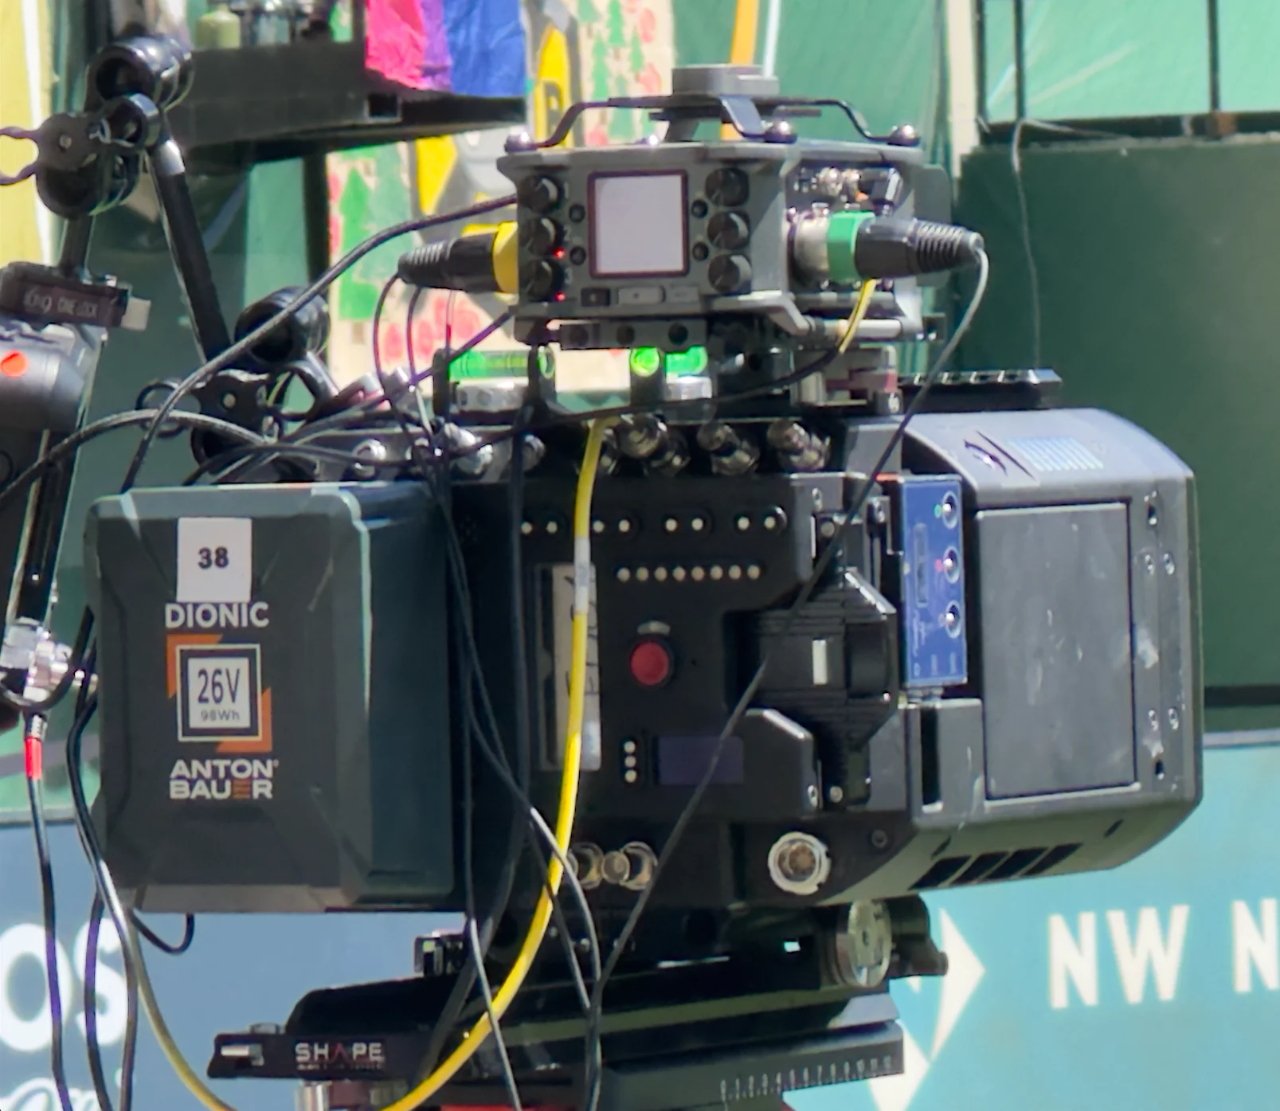 Close-up of a professional video camera with multiple cables, battery pack, and control panel. Background includes colorful posters and a green wall with the letters 'NW' visible.